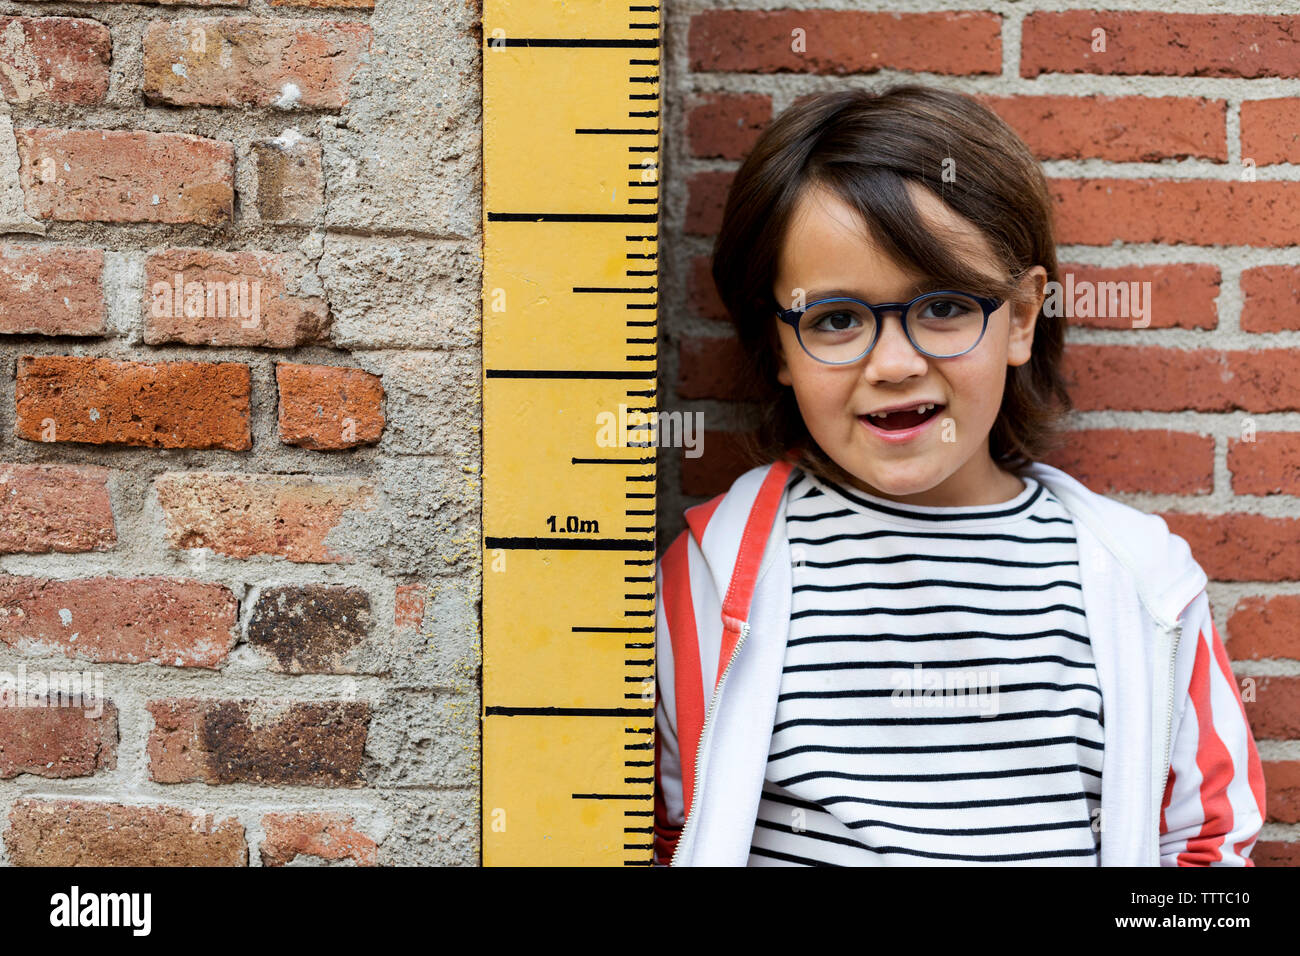 Child In striped top Being Measured On A Keepsake Measuring Stick Stock Photo